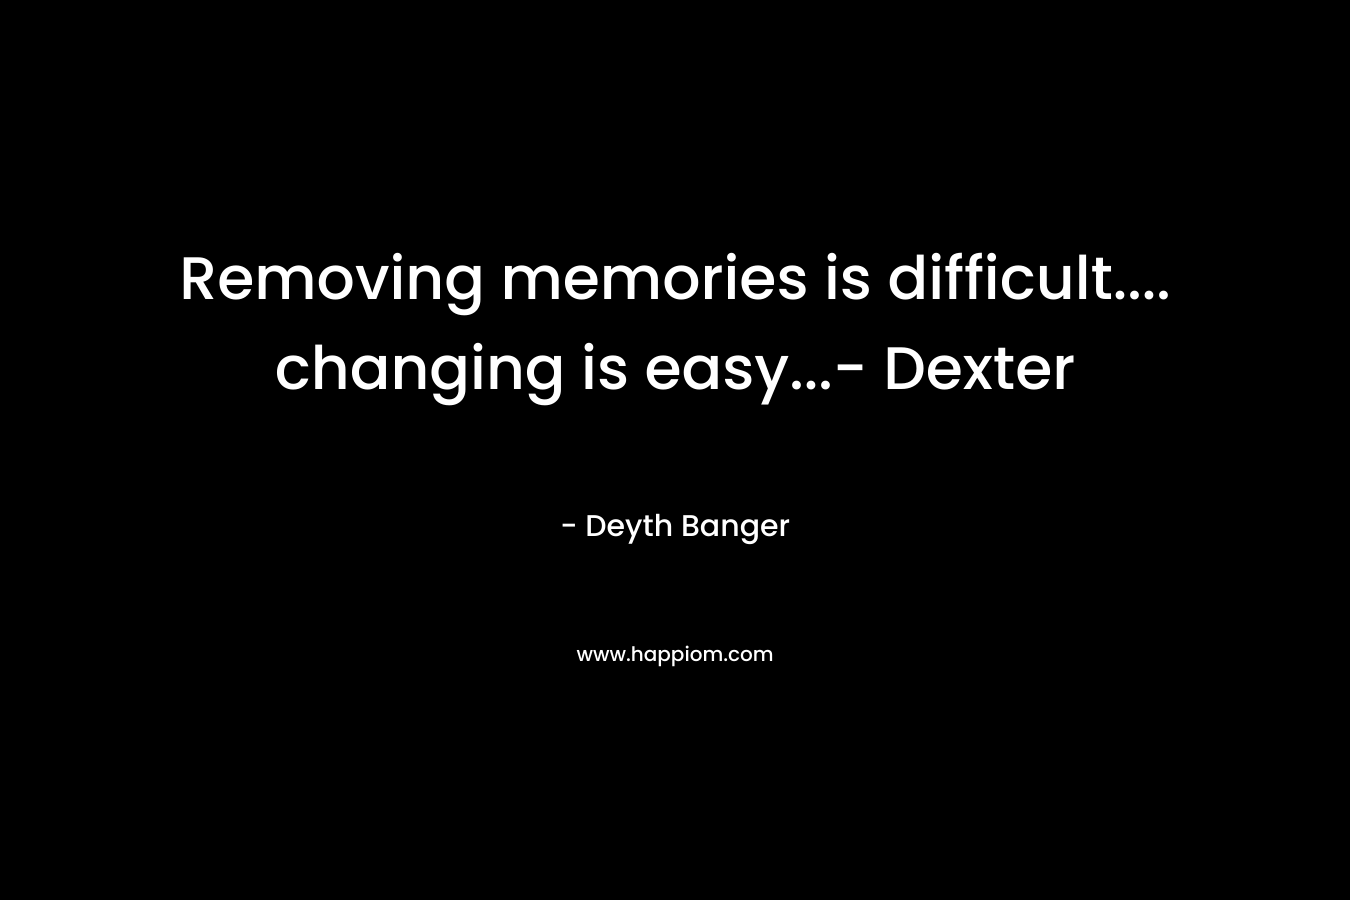 Removing memories is difficult.... changing is easy...- Dexter